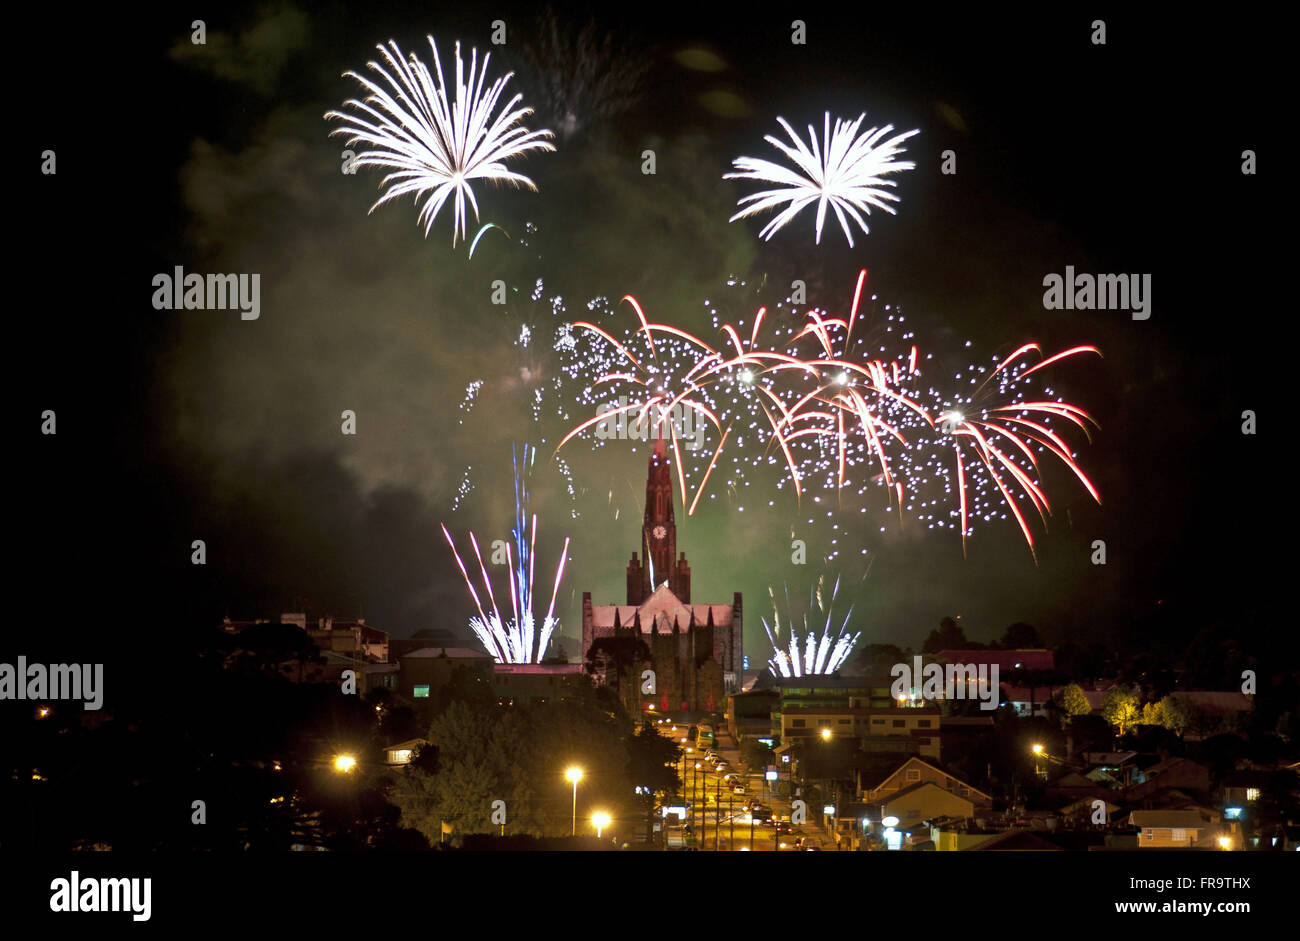 Fireworks in the city of Cinnamon with Church of Our Lady of Lourdes in the background Stock Photo